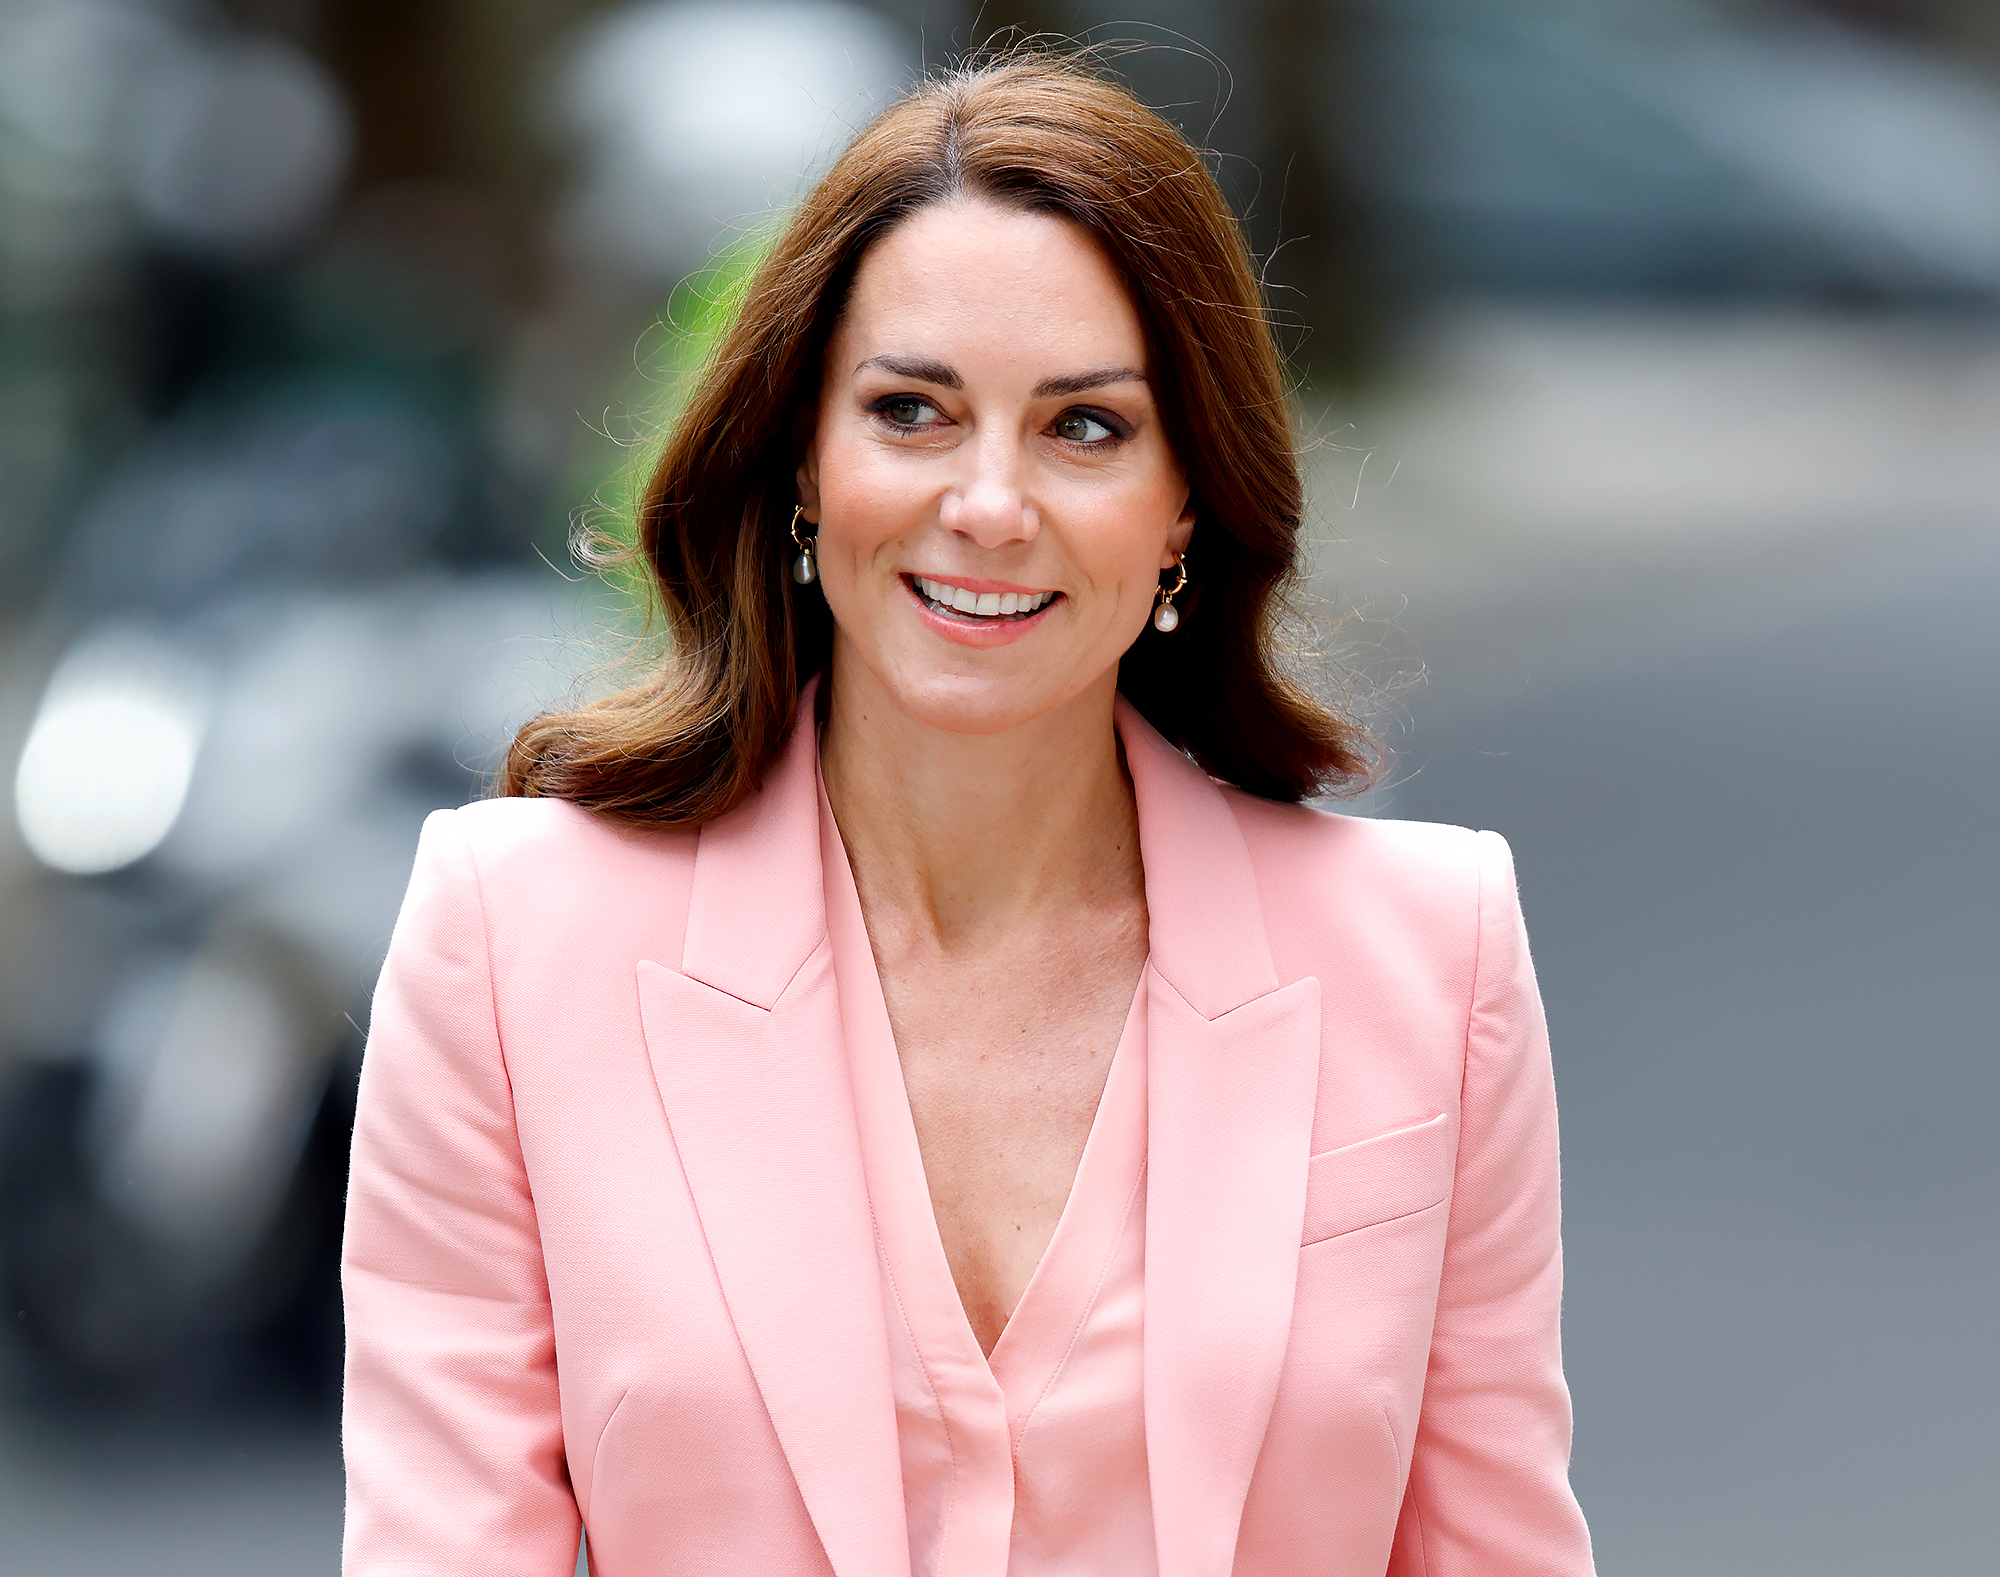 Princess Kate Middleton Spotted After Photo Debacle